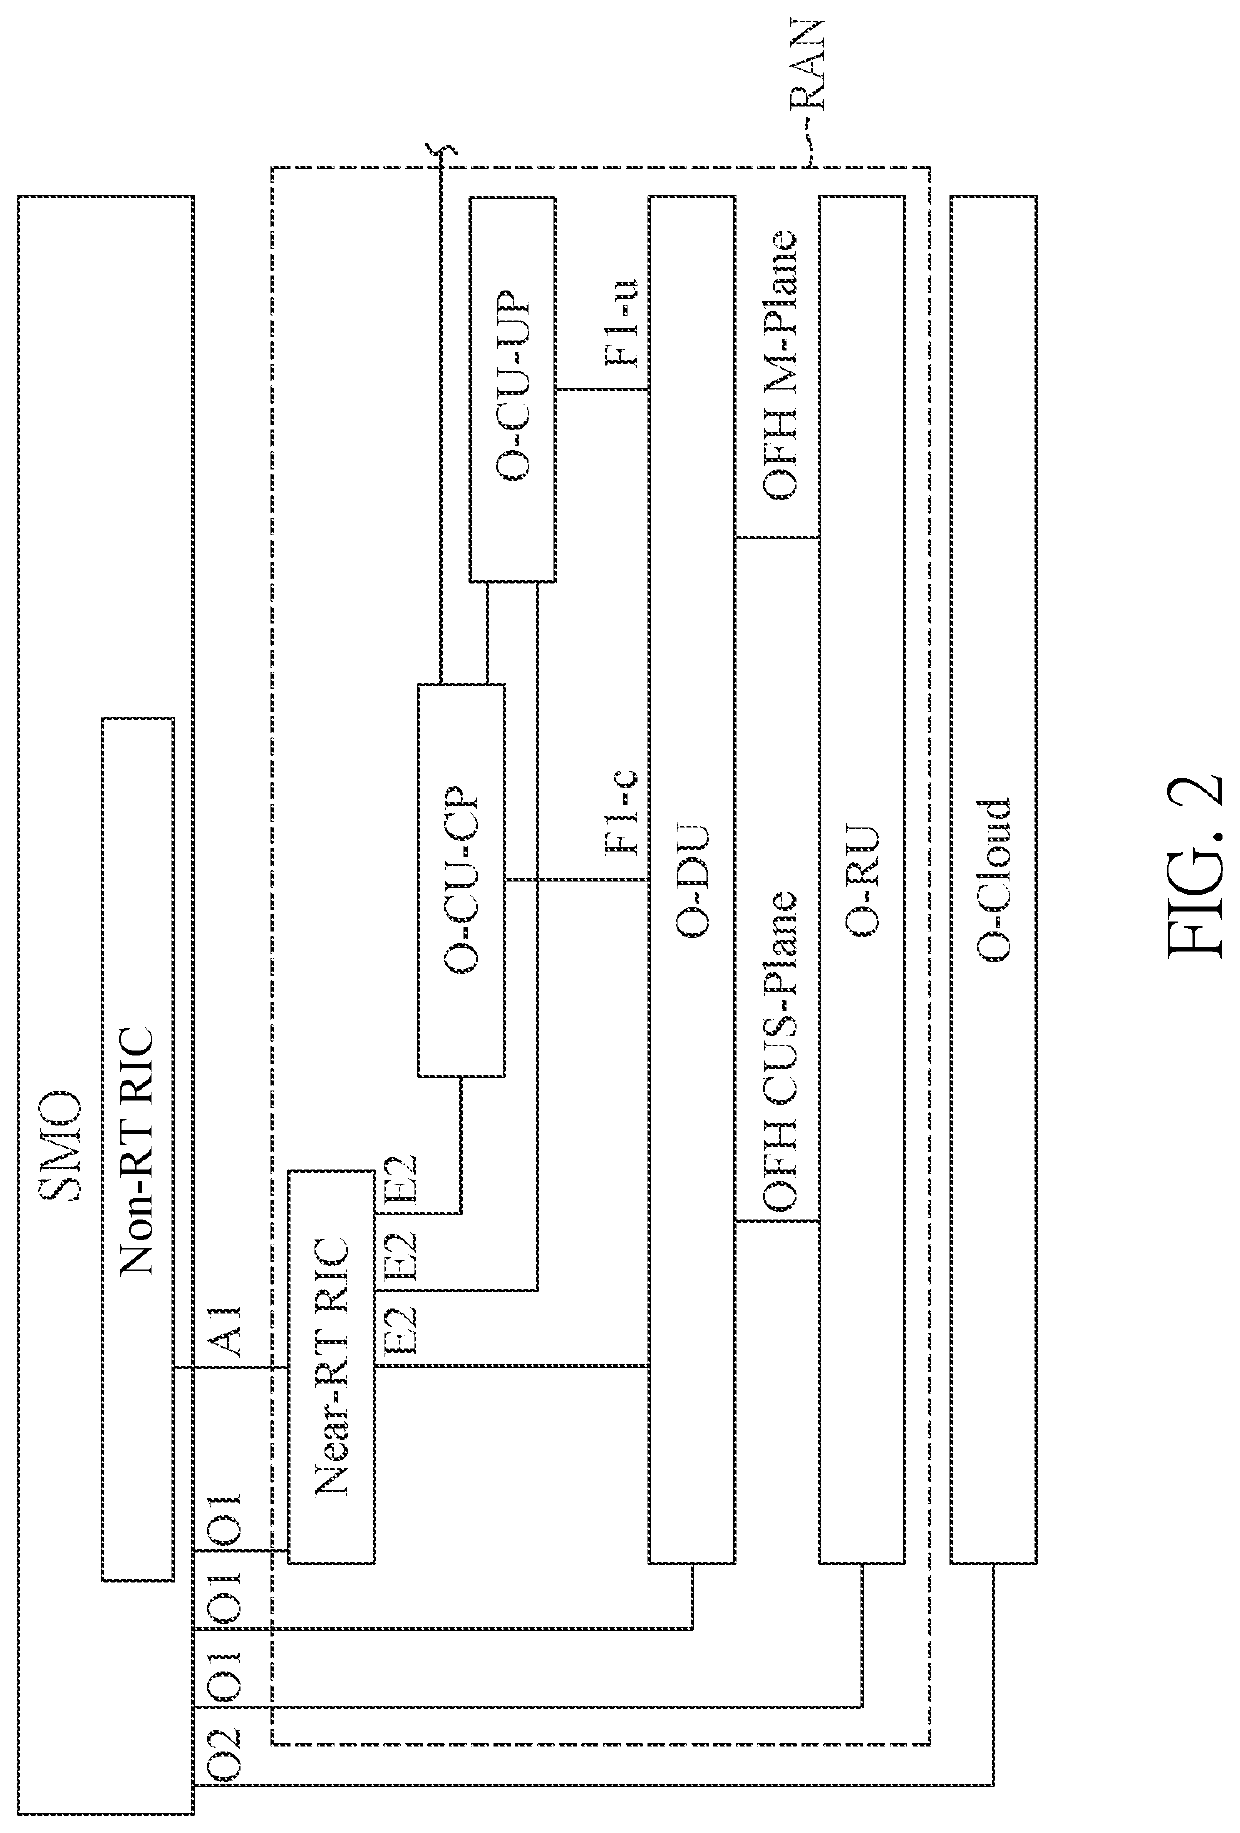 Ultra-reliable and low latency communications local breakout method and system for next generation radio access network